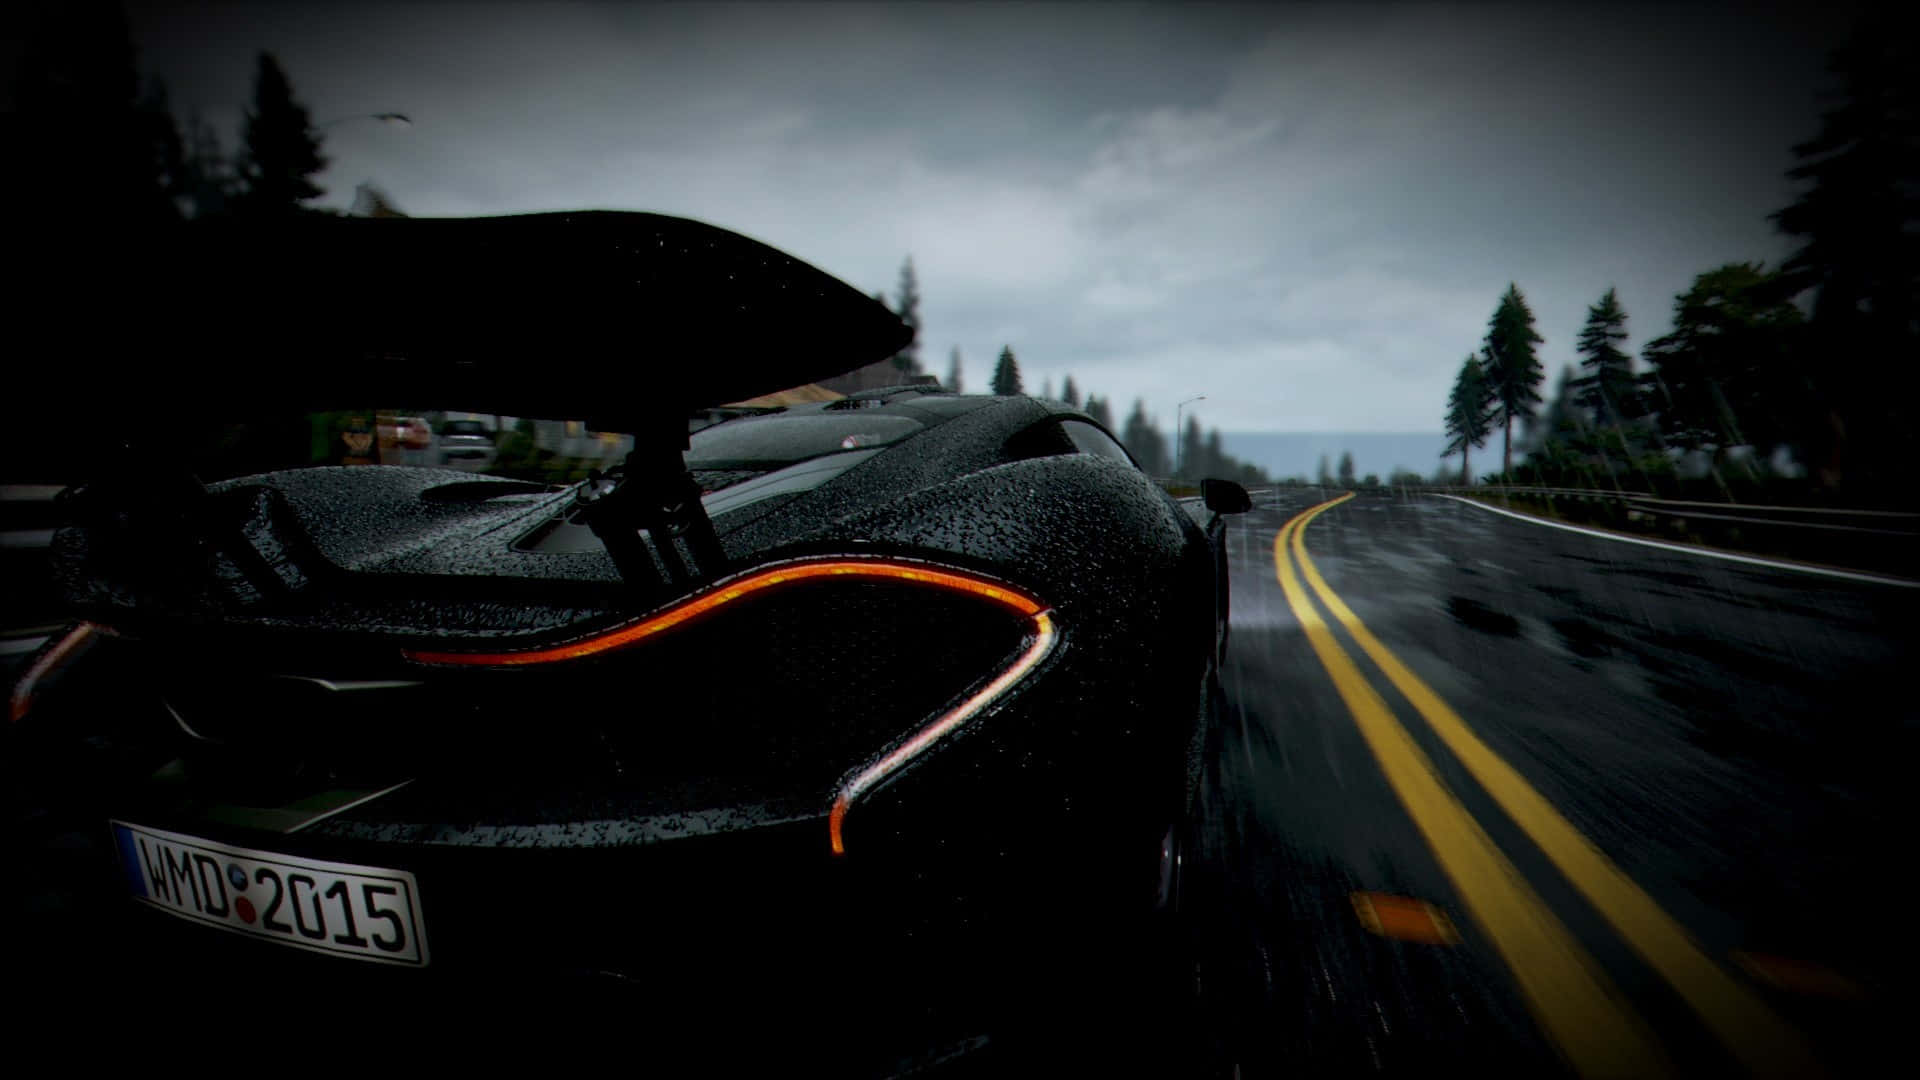 Hd Project Cars Mclaren P1 Road Background